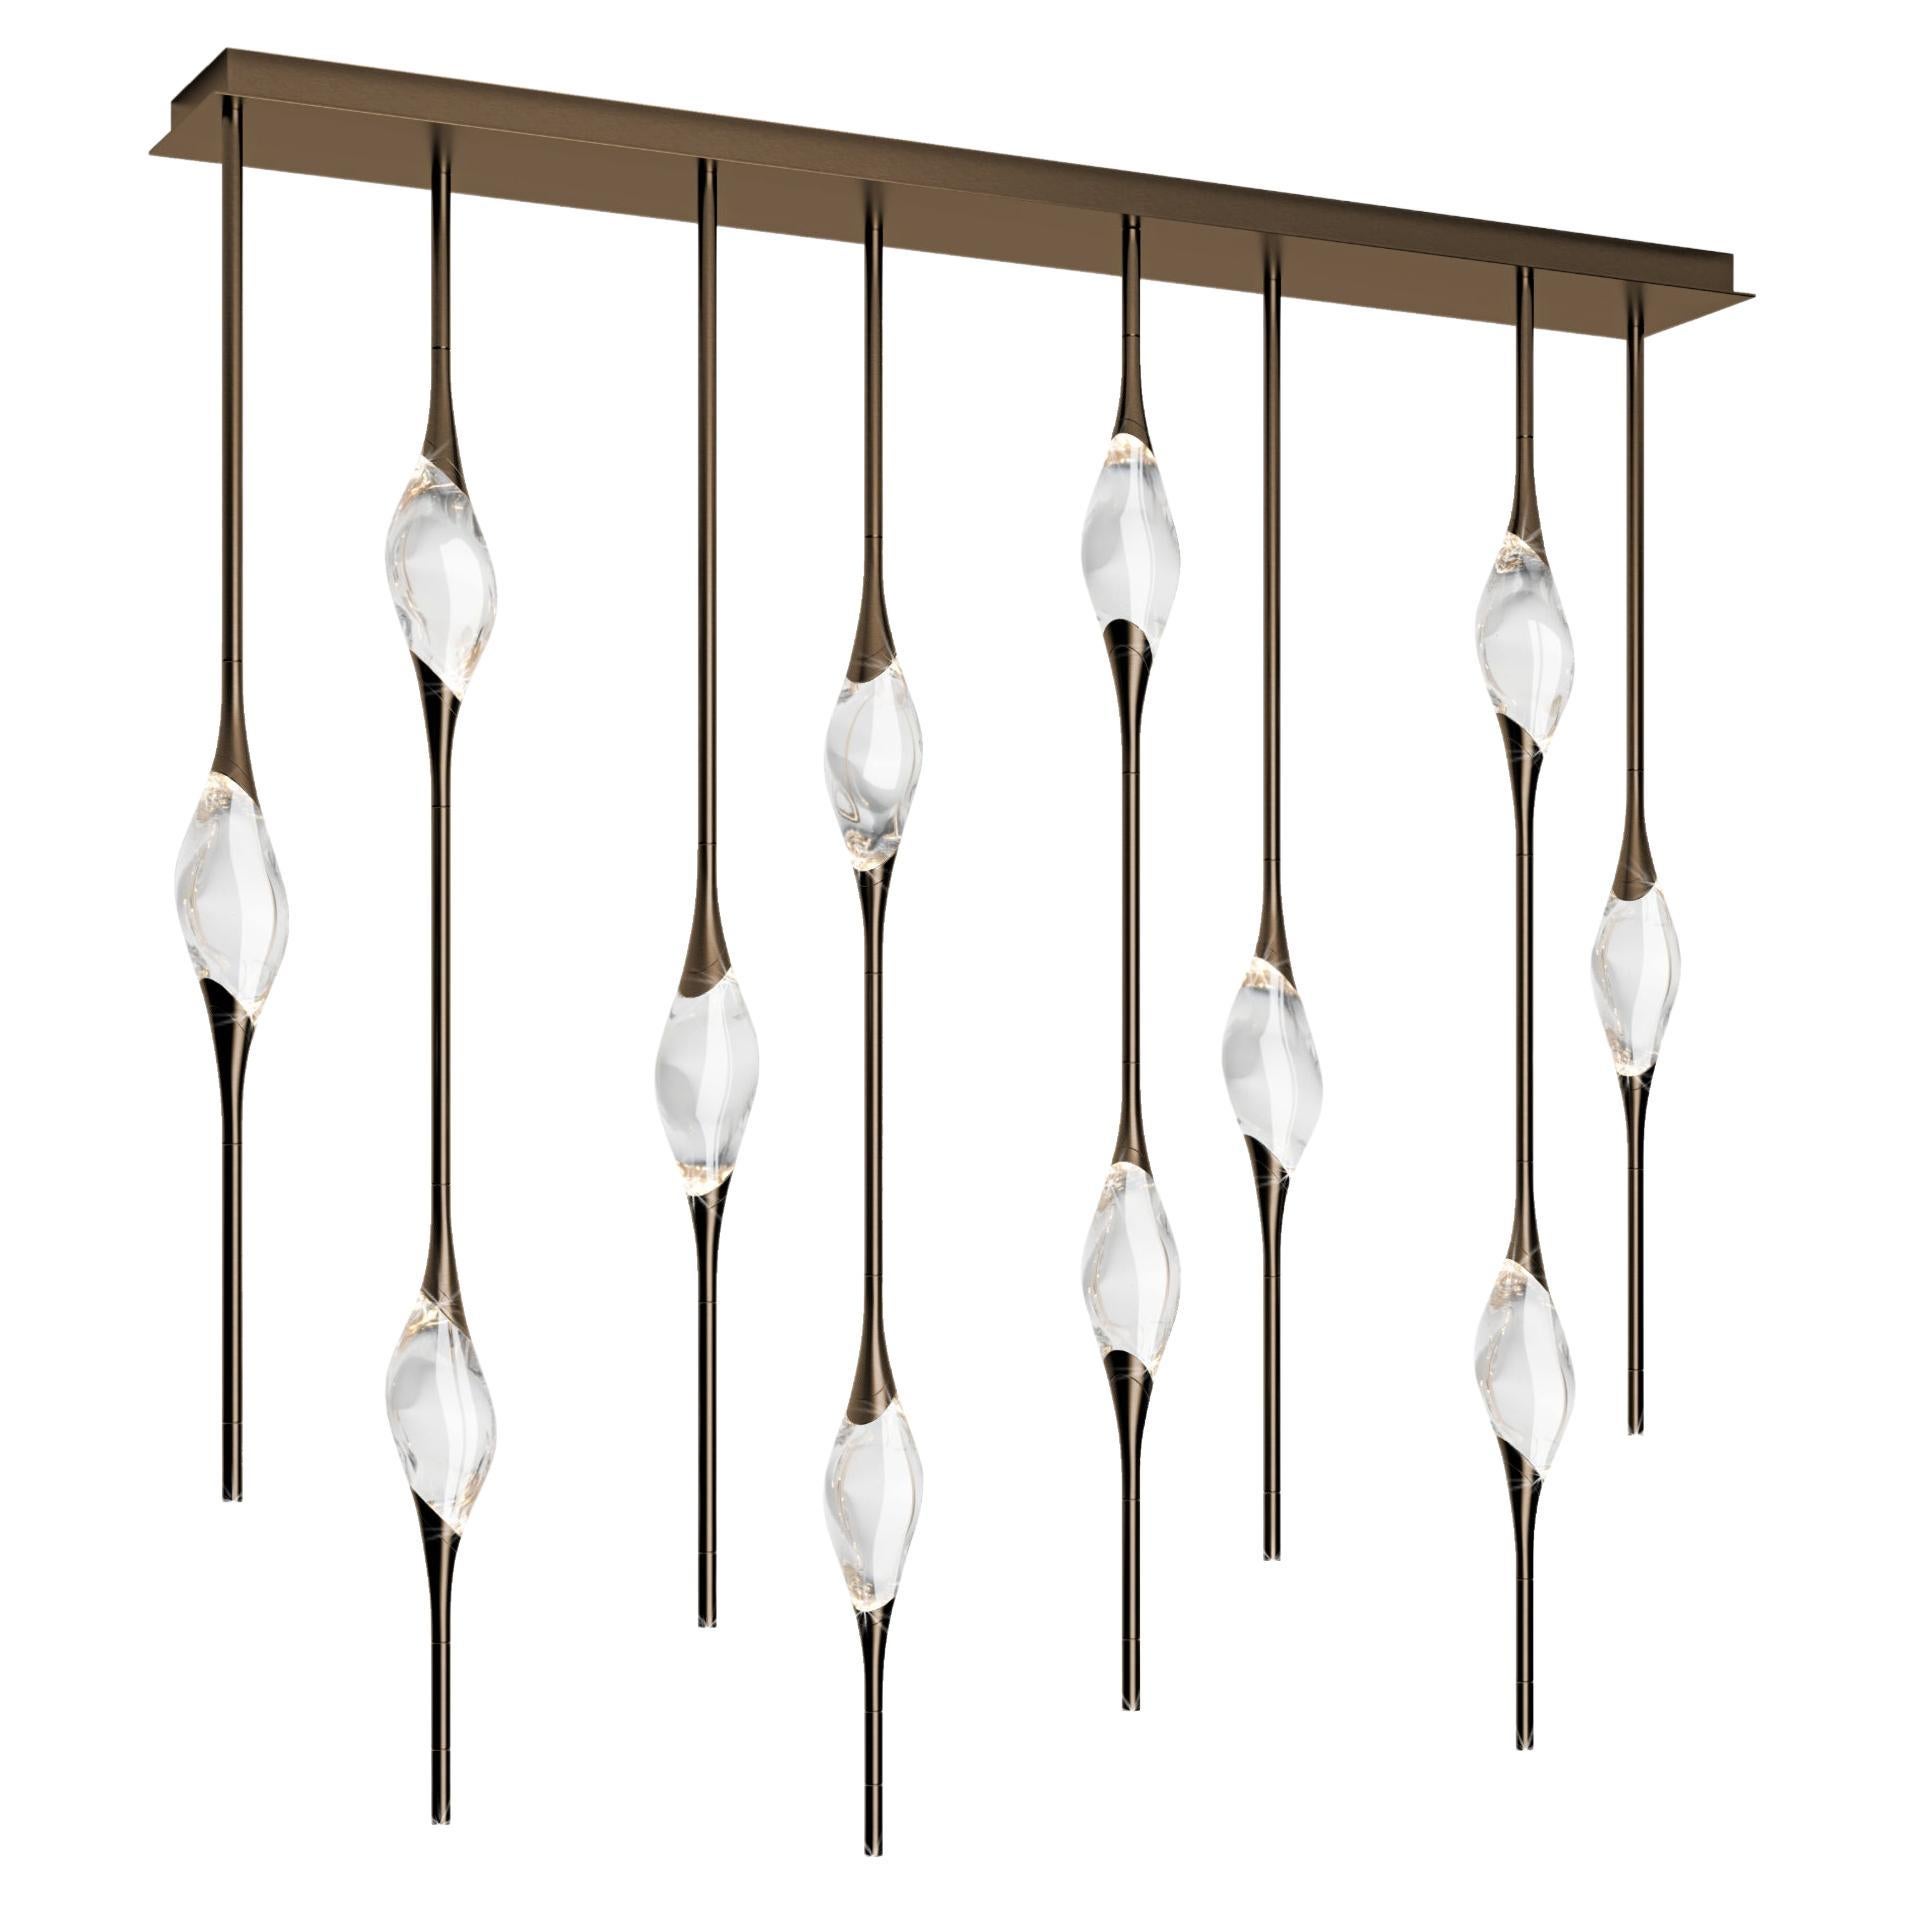 "Il Pezzo 12 Staggered Chandelier" - length 150cm/59” - bronze - crystal - LEDs For Sale